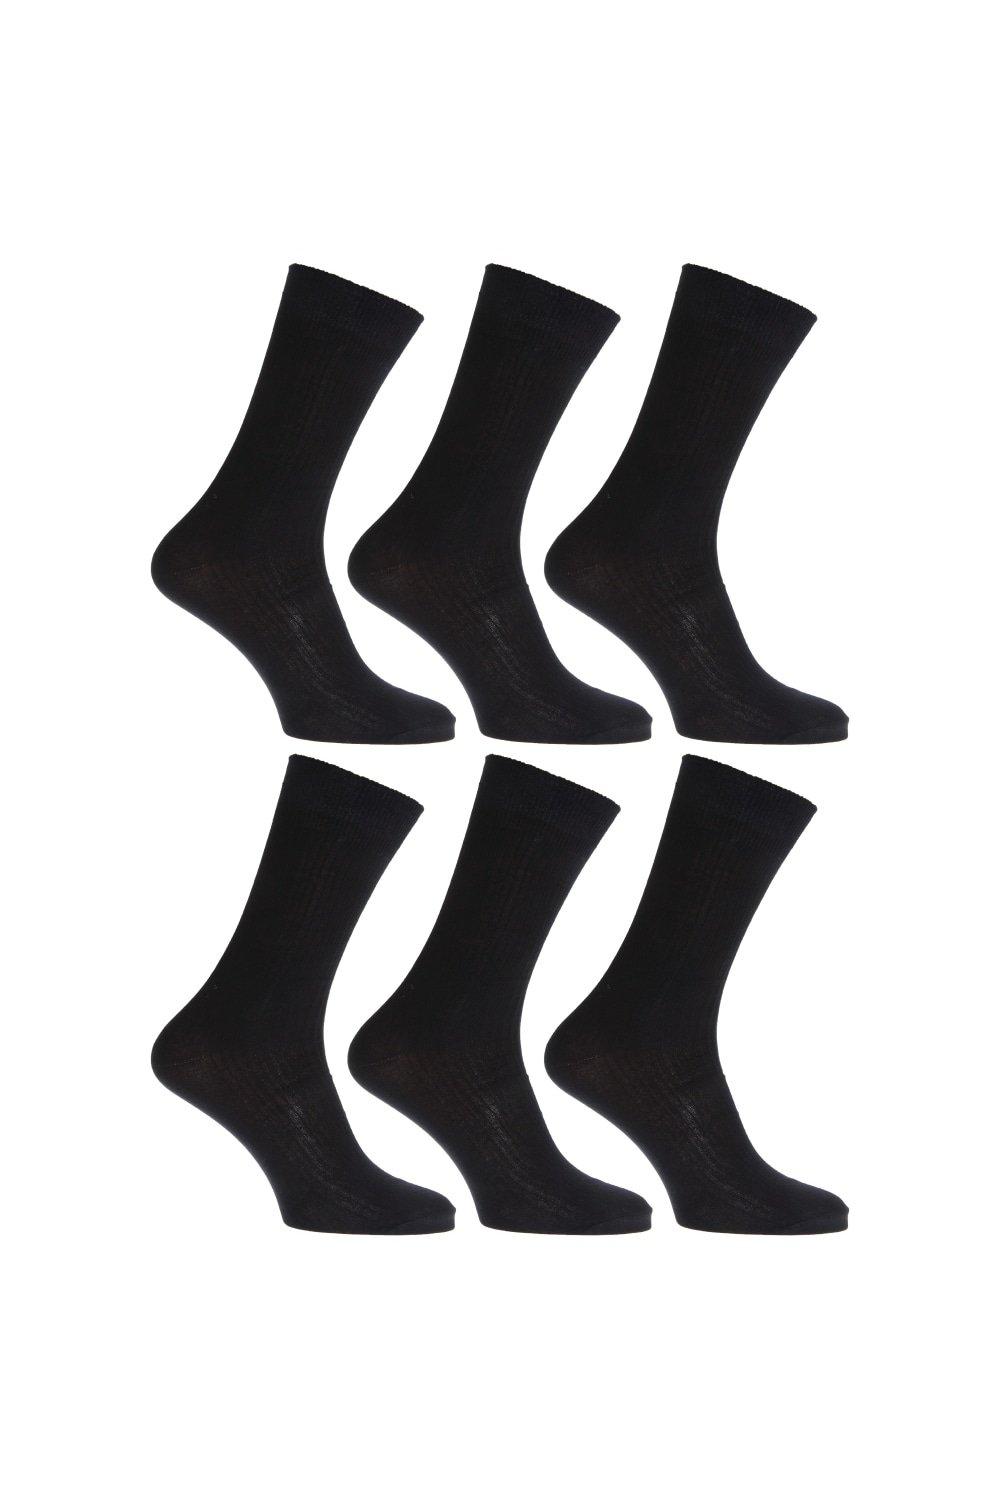 Bamboo Super Soft Work/Casual Non Elastic Top Socks (Pack Of 6)